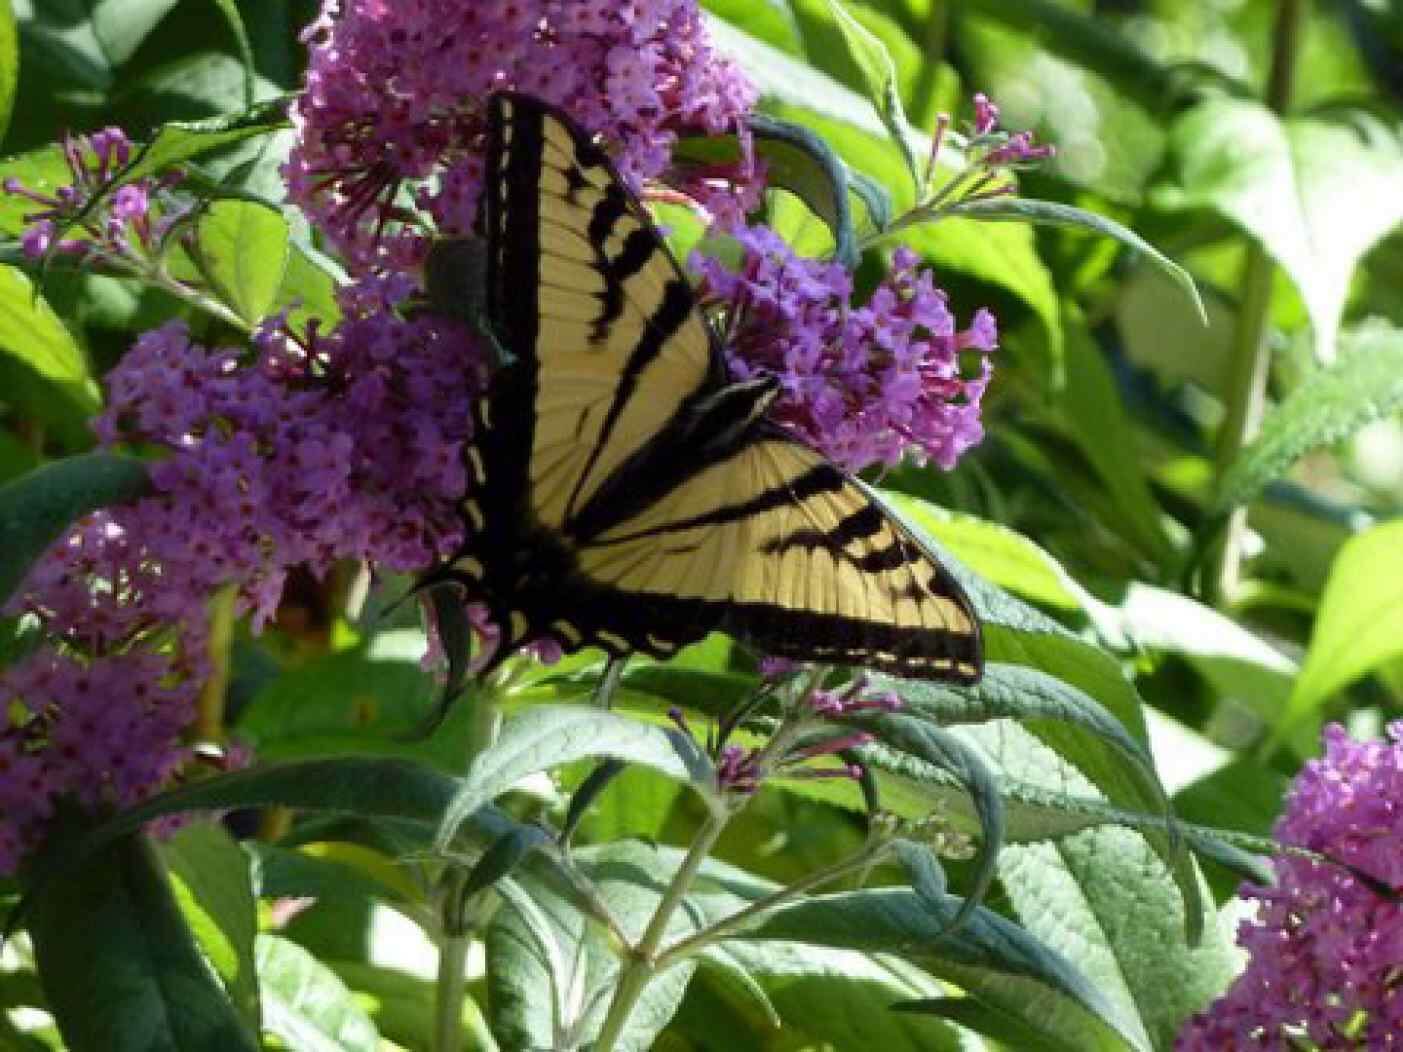 The Swallowtails